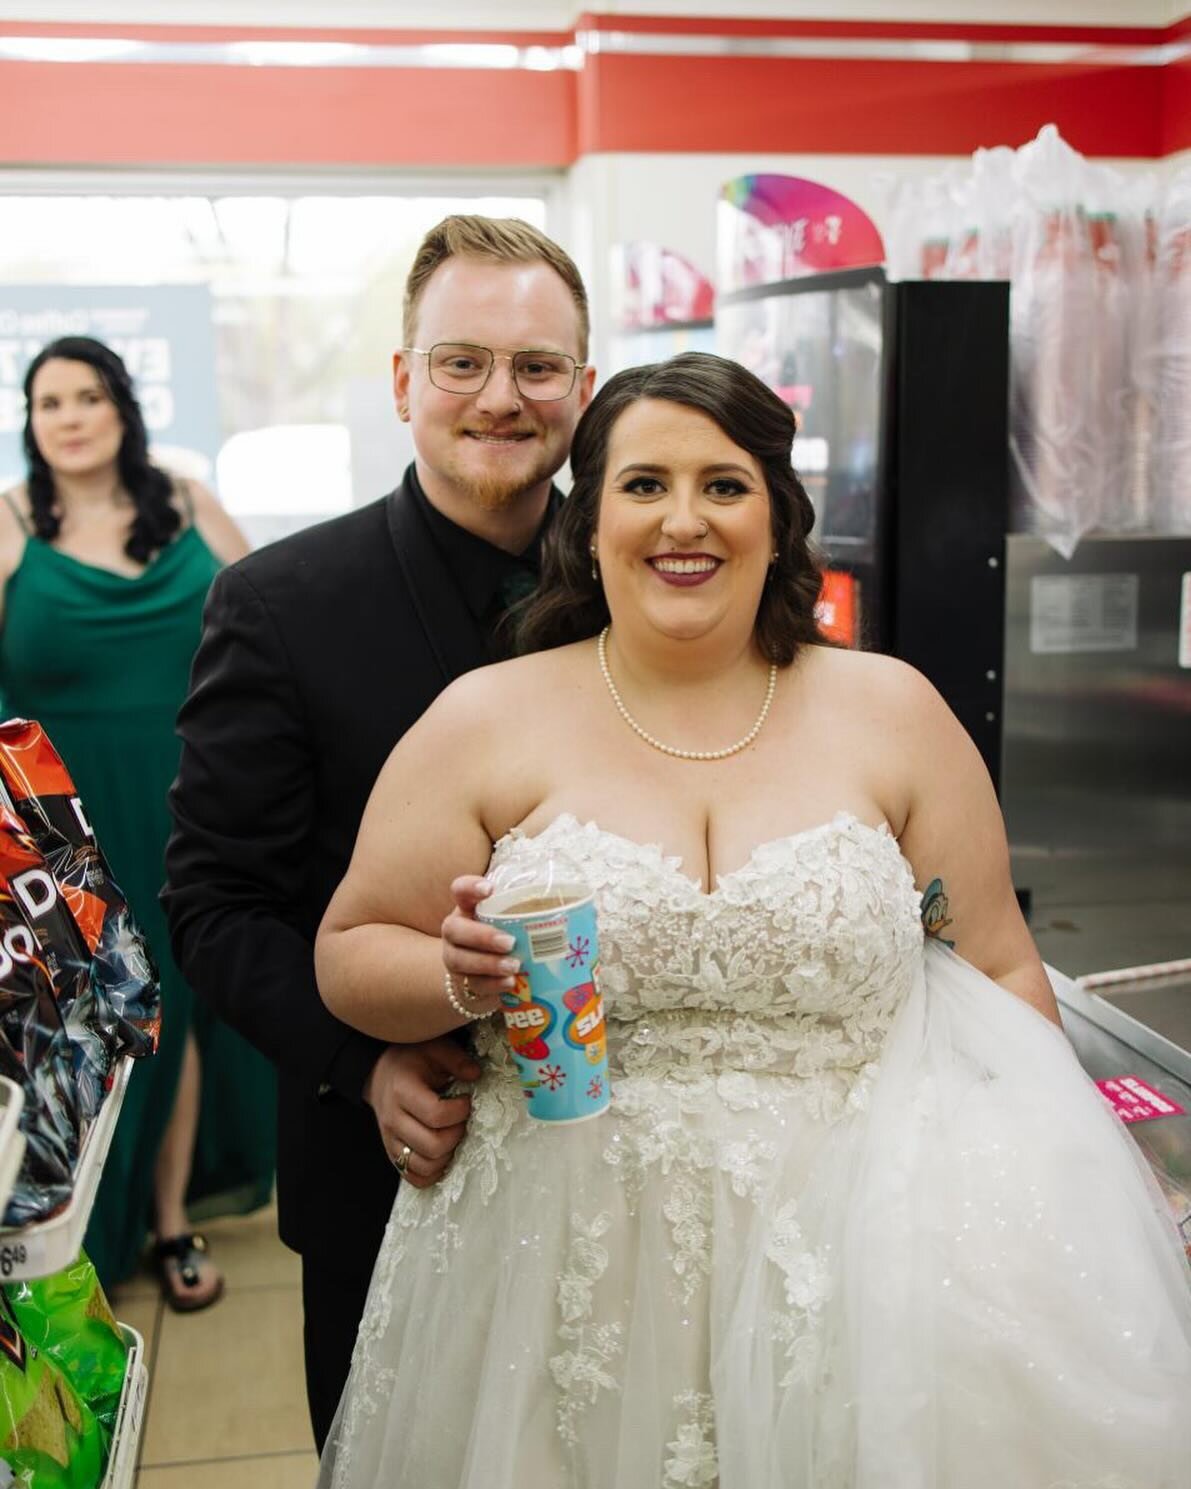 Winter might be coming, but slushes are a year round treat! 🍧❄️

Have fun on your wedding day and do what you love as a couple! Take time to make those stops and add the personal touches. 

Photo: @jessicakaitlyn.photography 
Video @michaelkfilms 
D